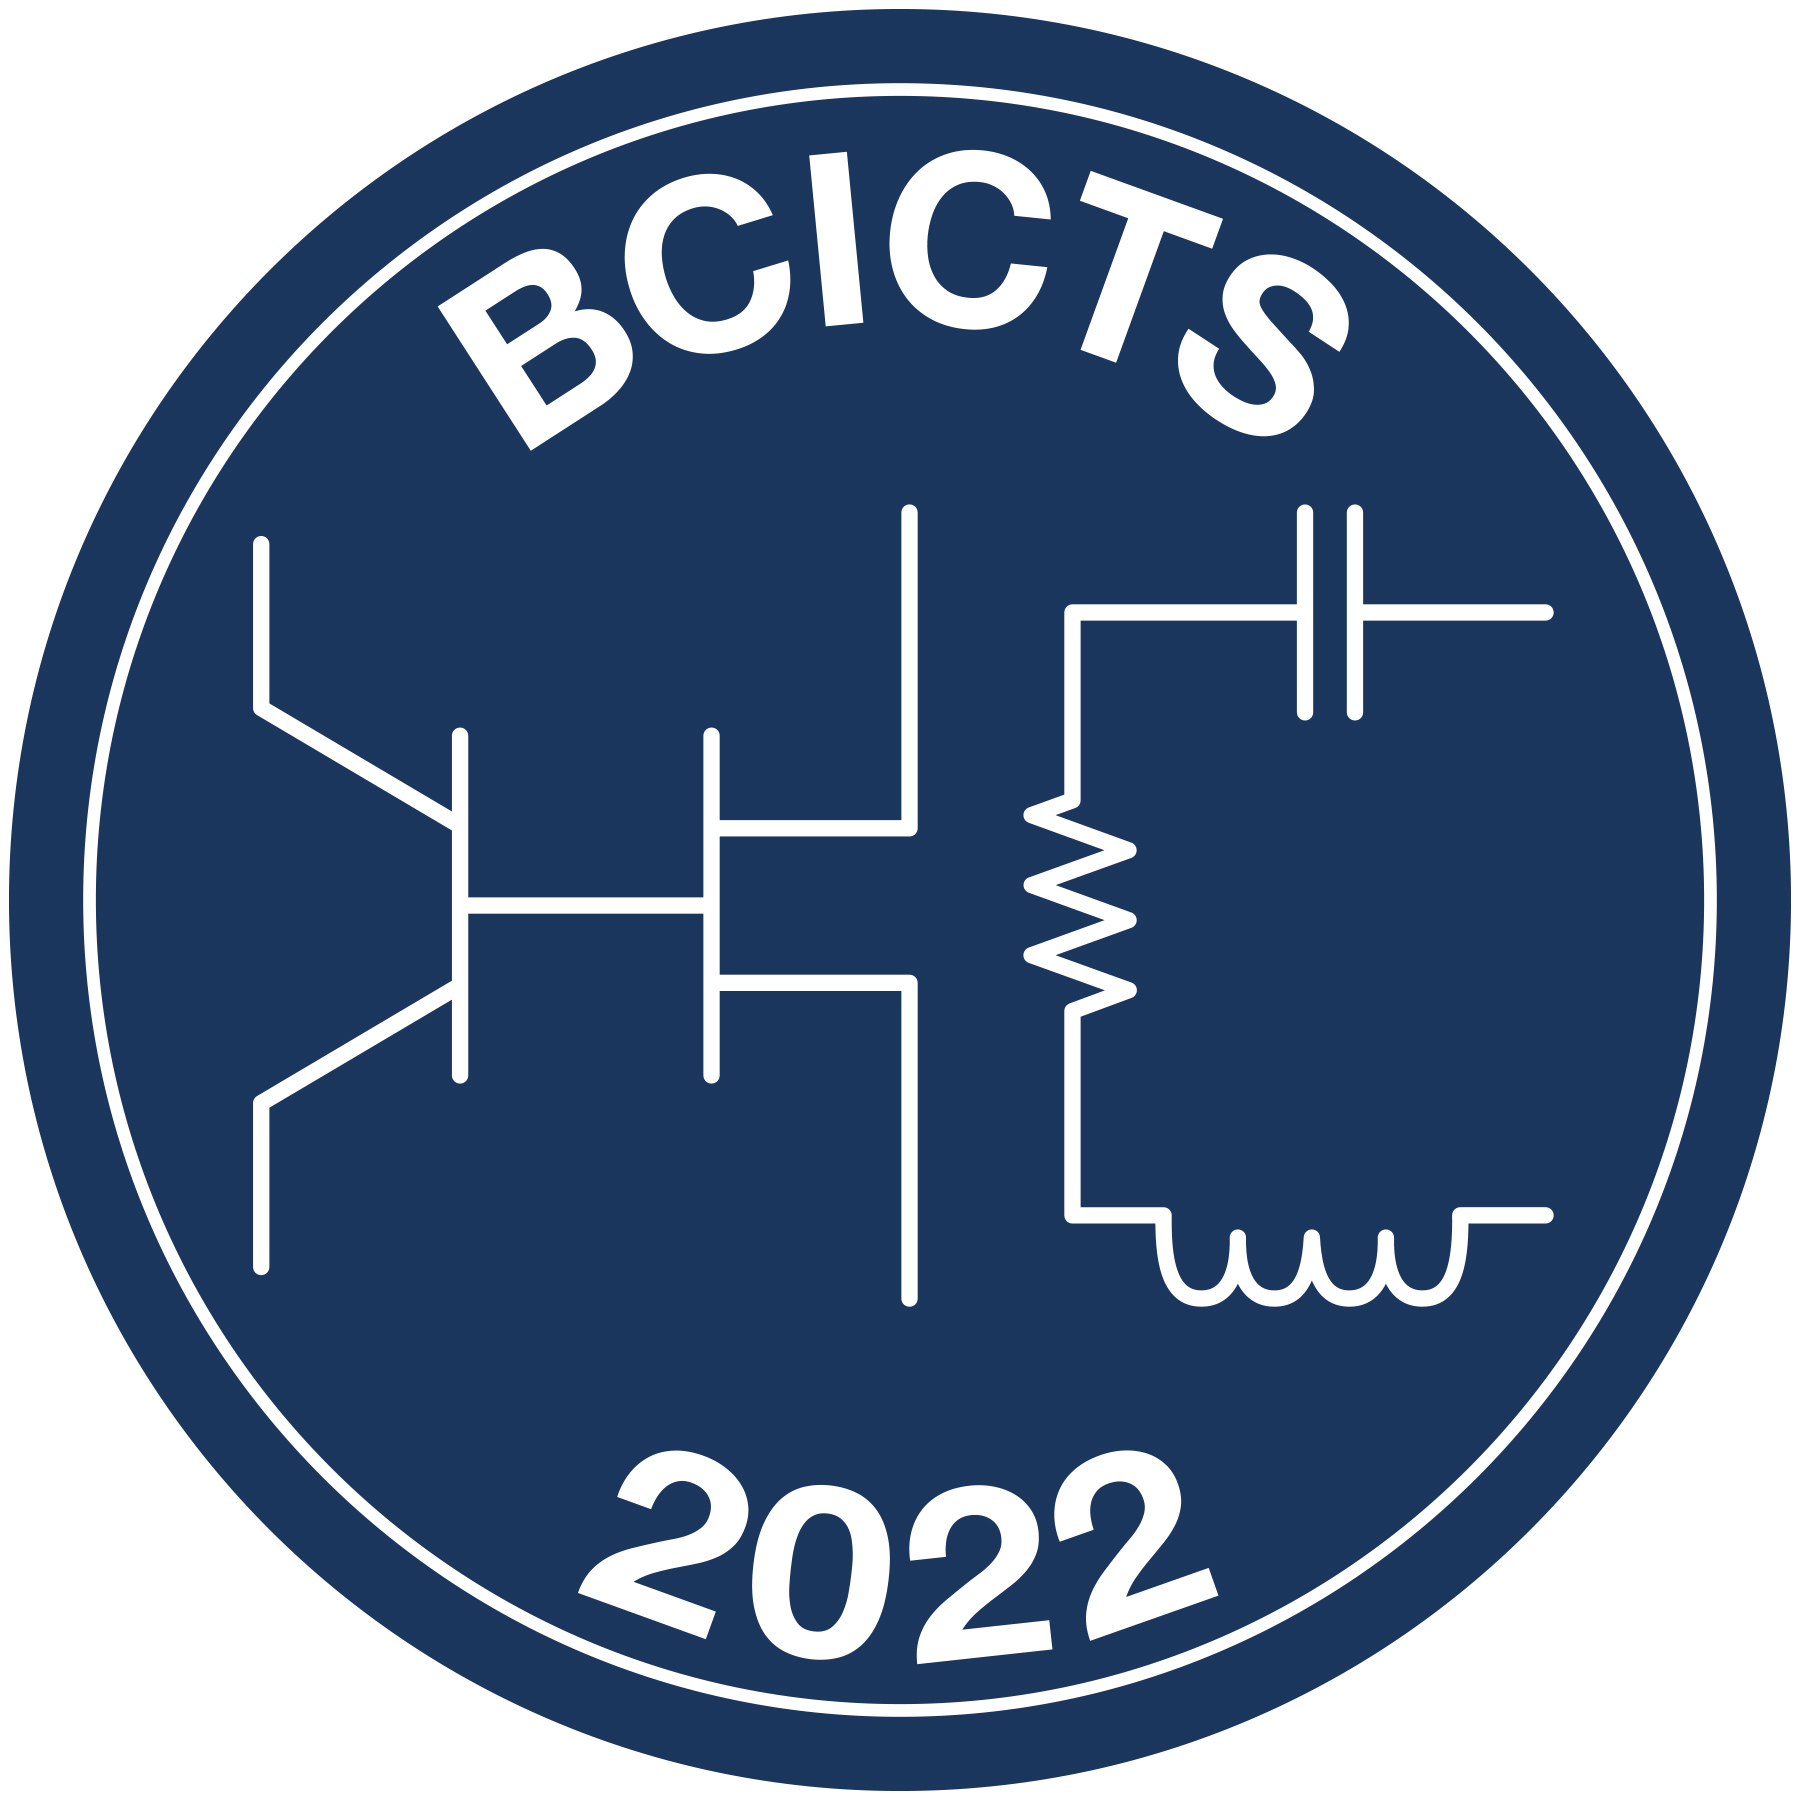 BCICTS-FINAL-LOGO-2022-WhiteOverBlue.jpg